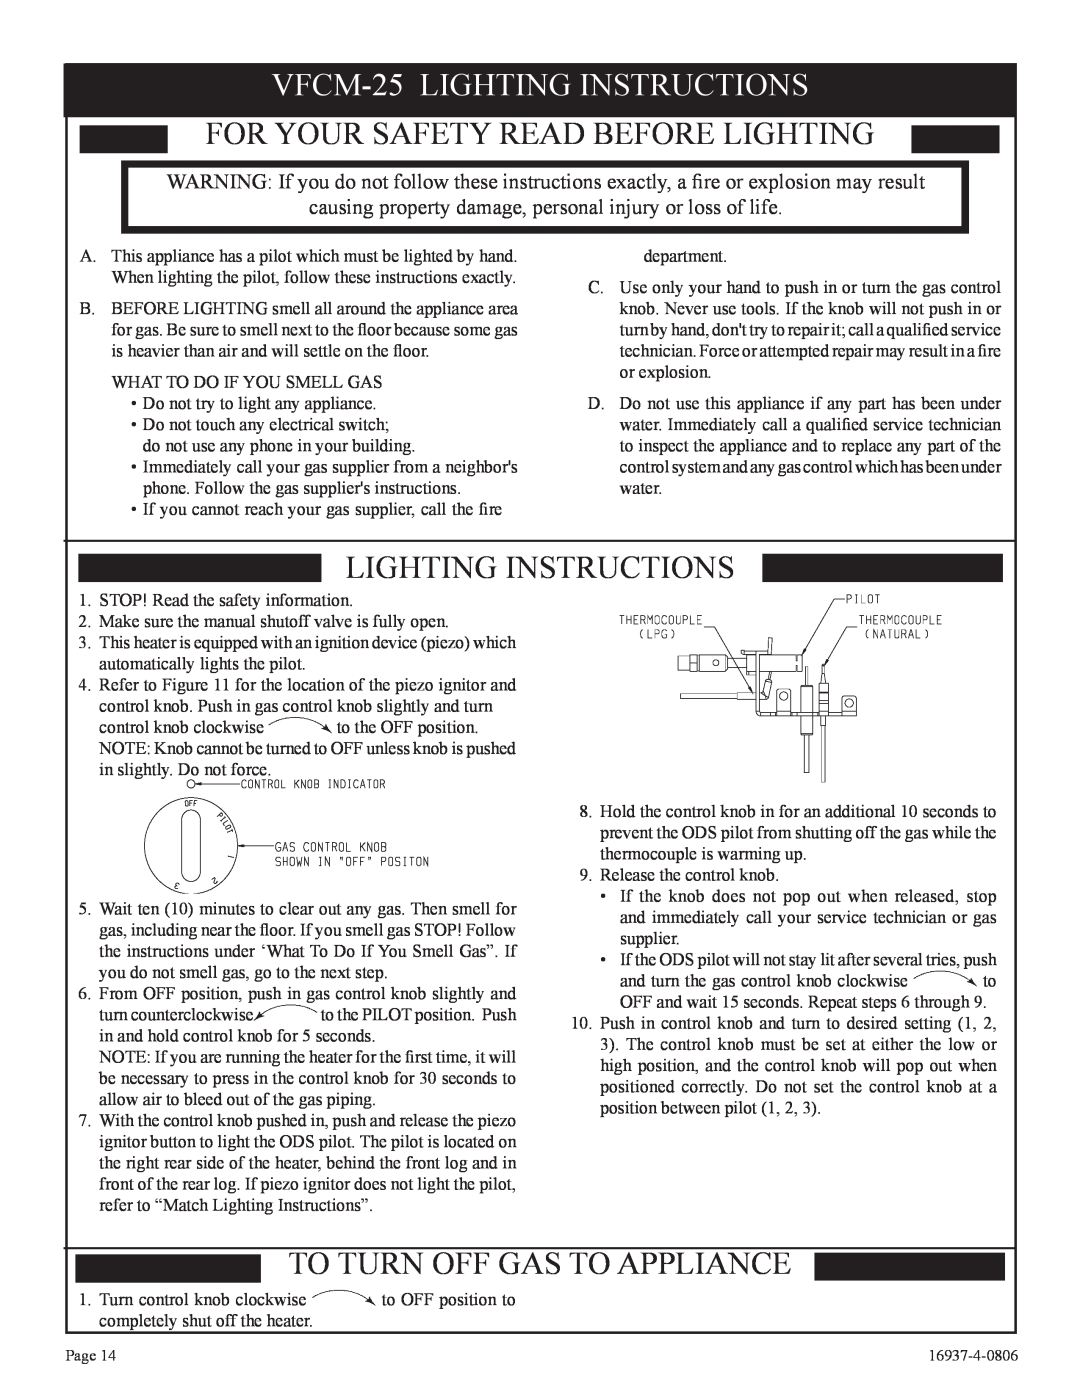 Empire Comfort Systems VFCT25-3 VFCM-25LIGHTING INSTRUCTIONS, For Your Safety Read Before Lighting, Lighting Instructions 